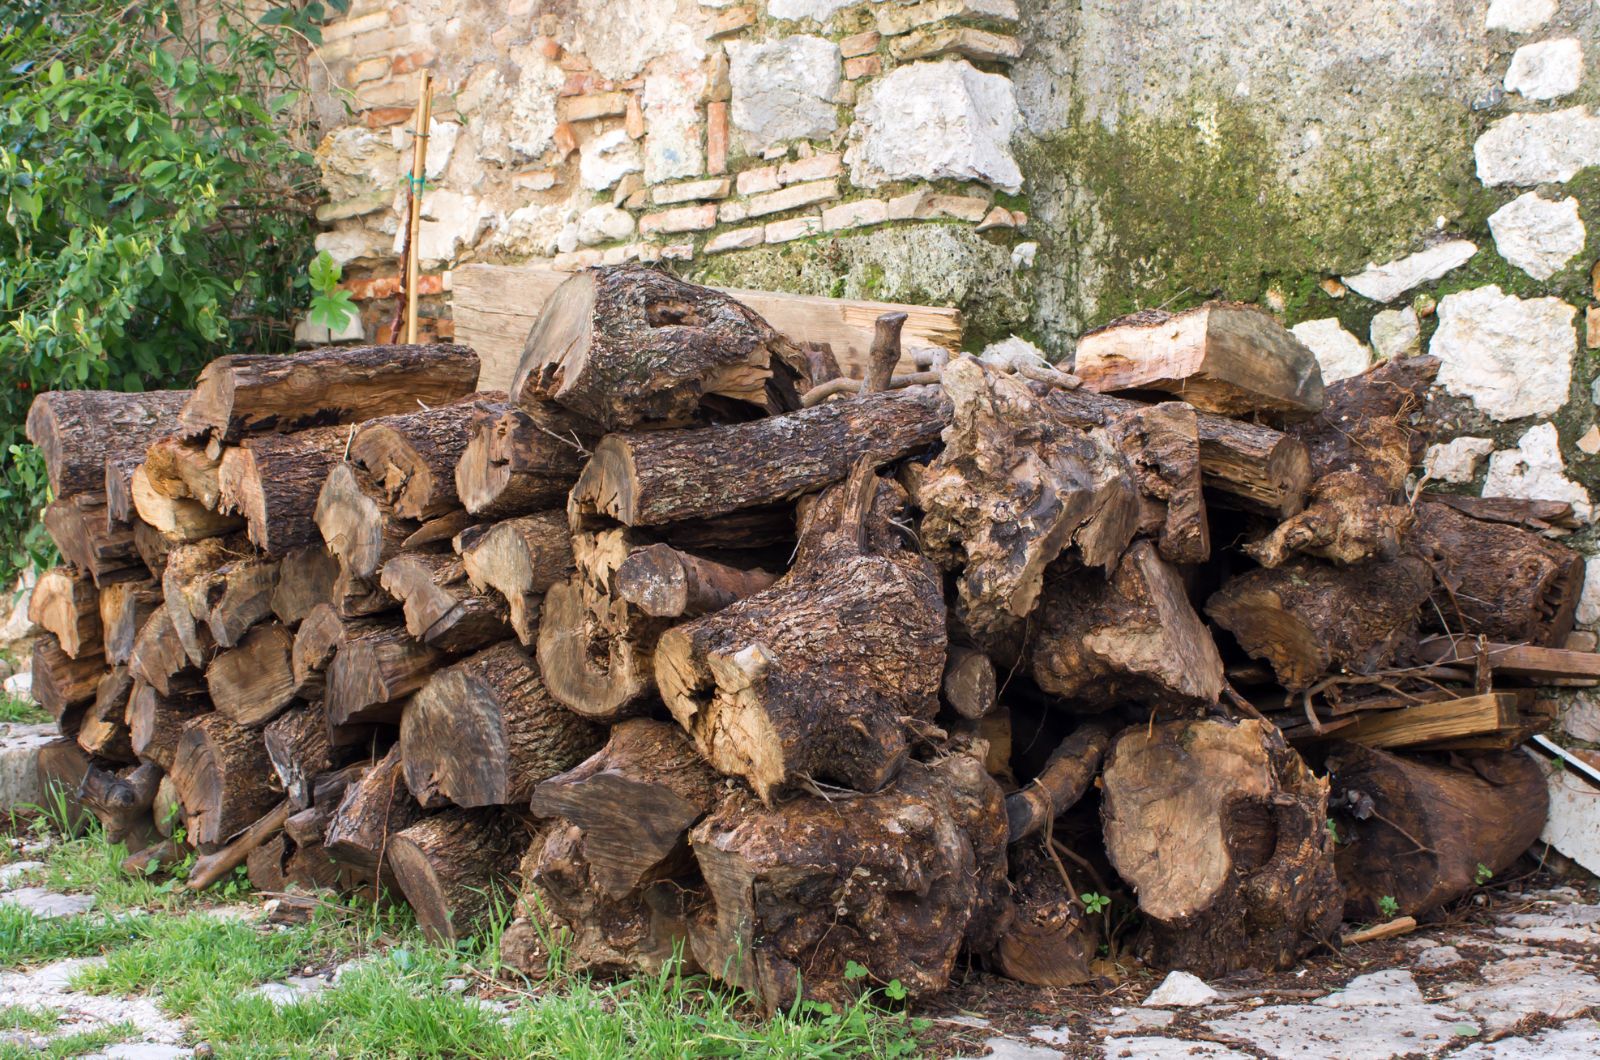 Pile of wood in a garden